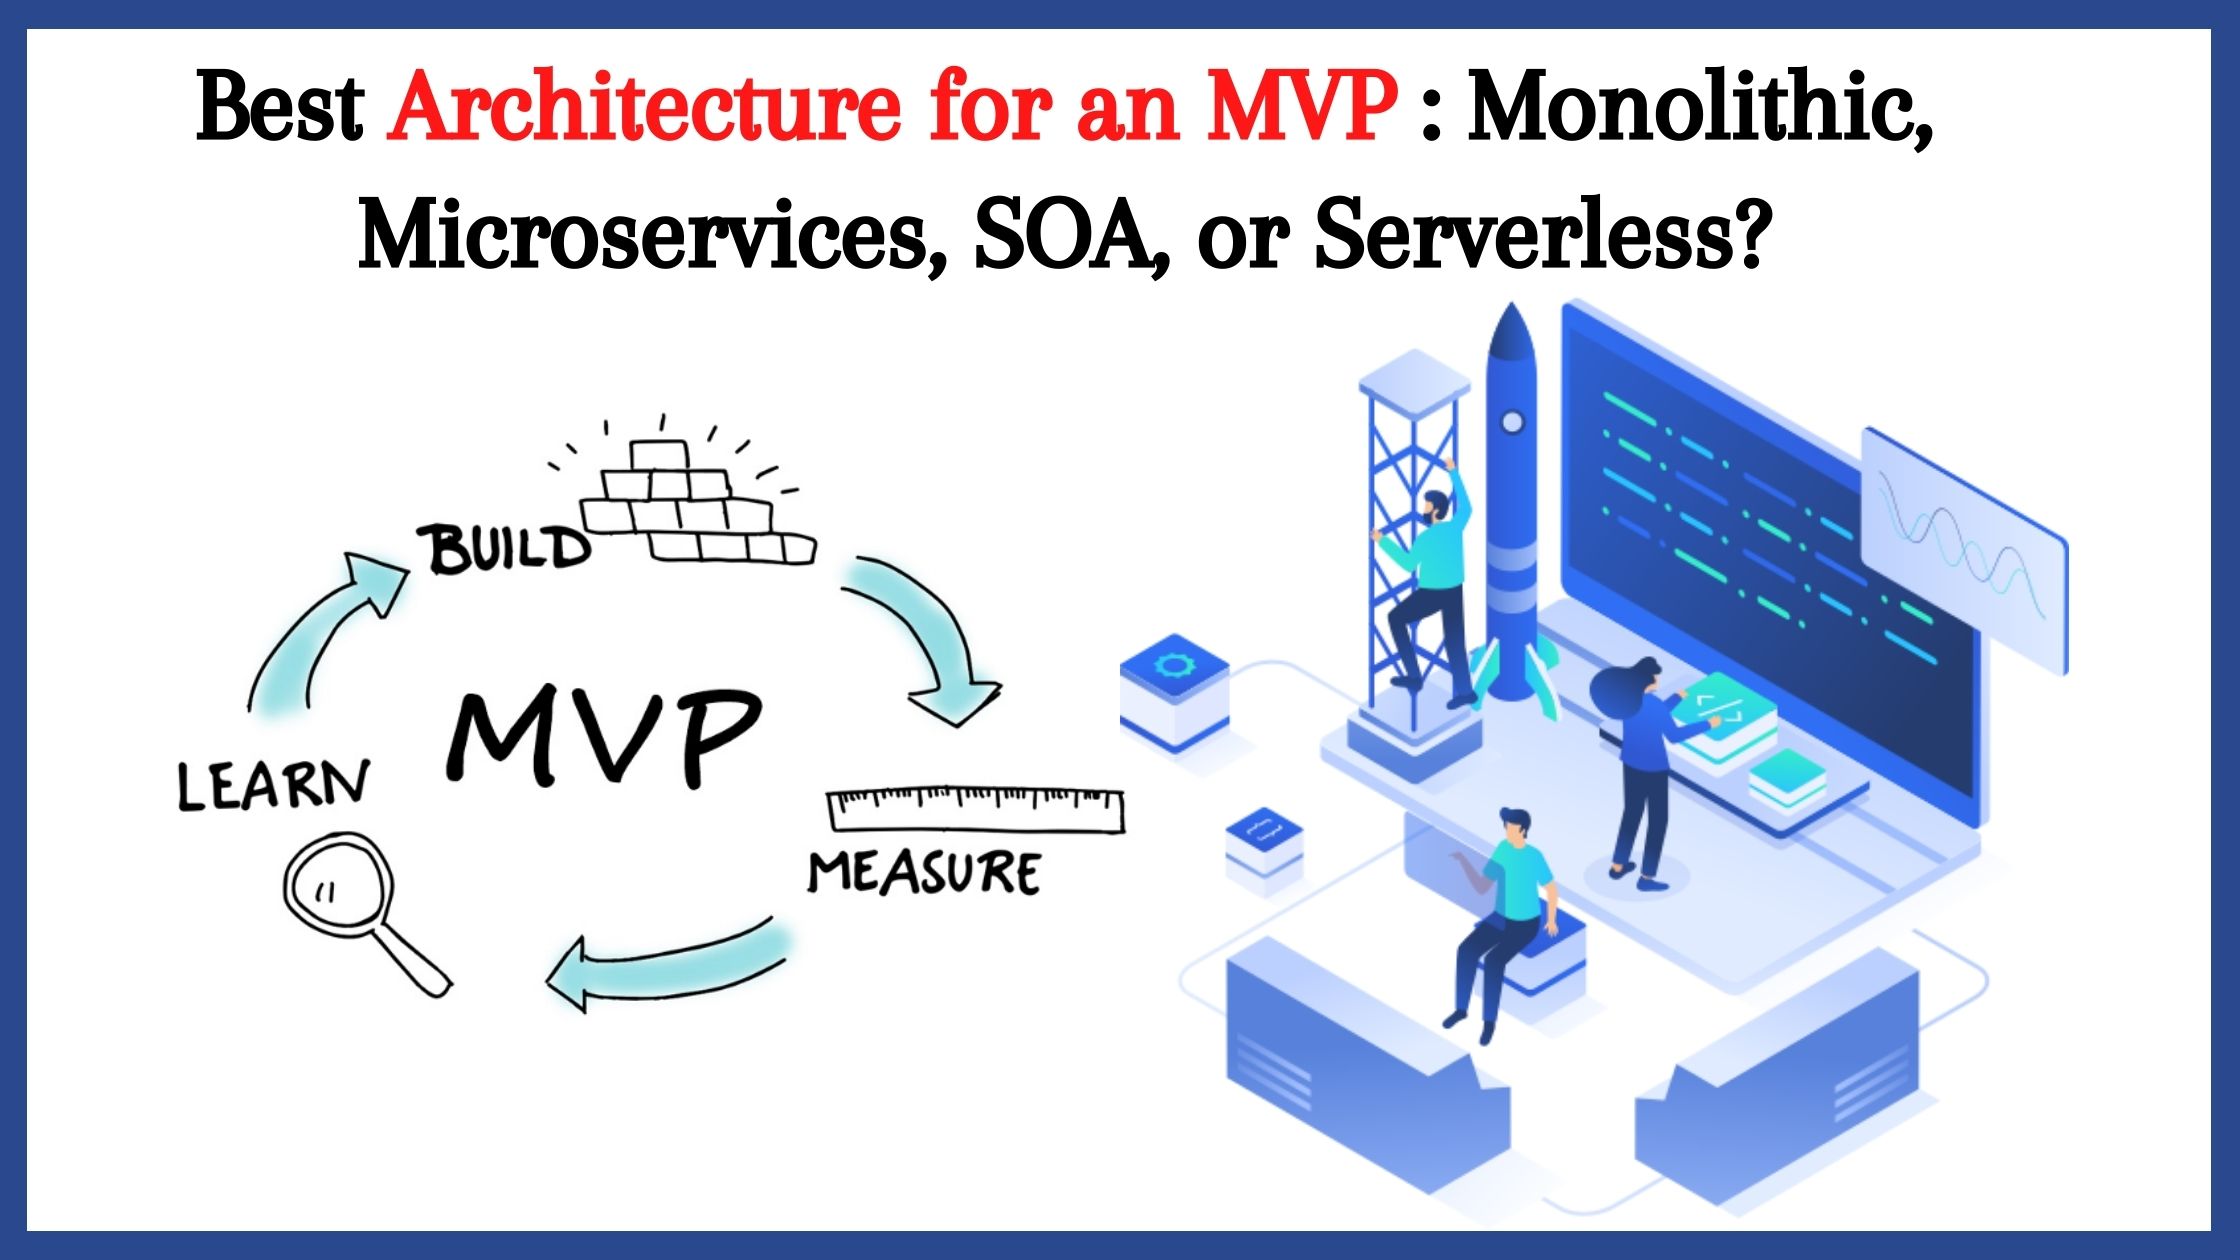 Best Architecture for an MVP: Monolithic, Microservices, SOA, or Serverless?